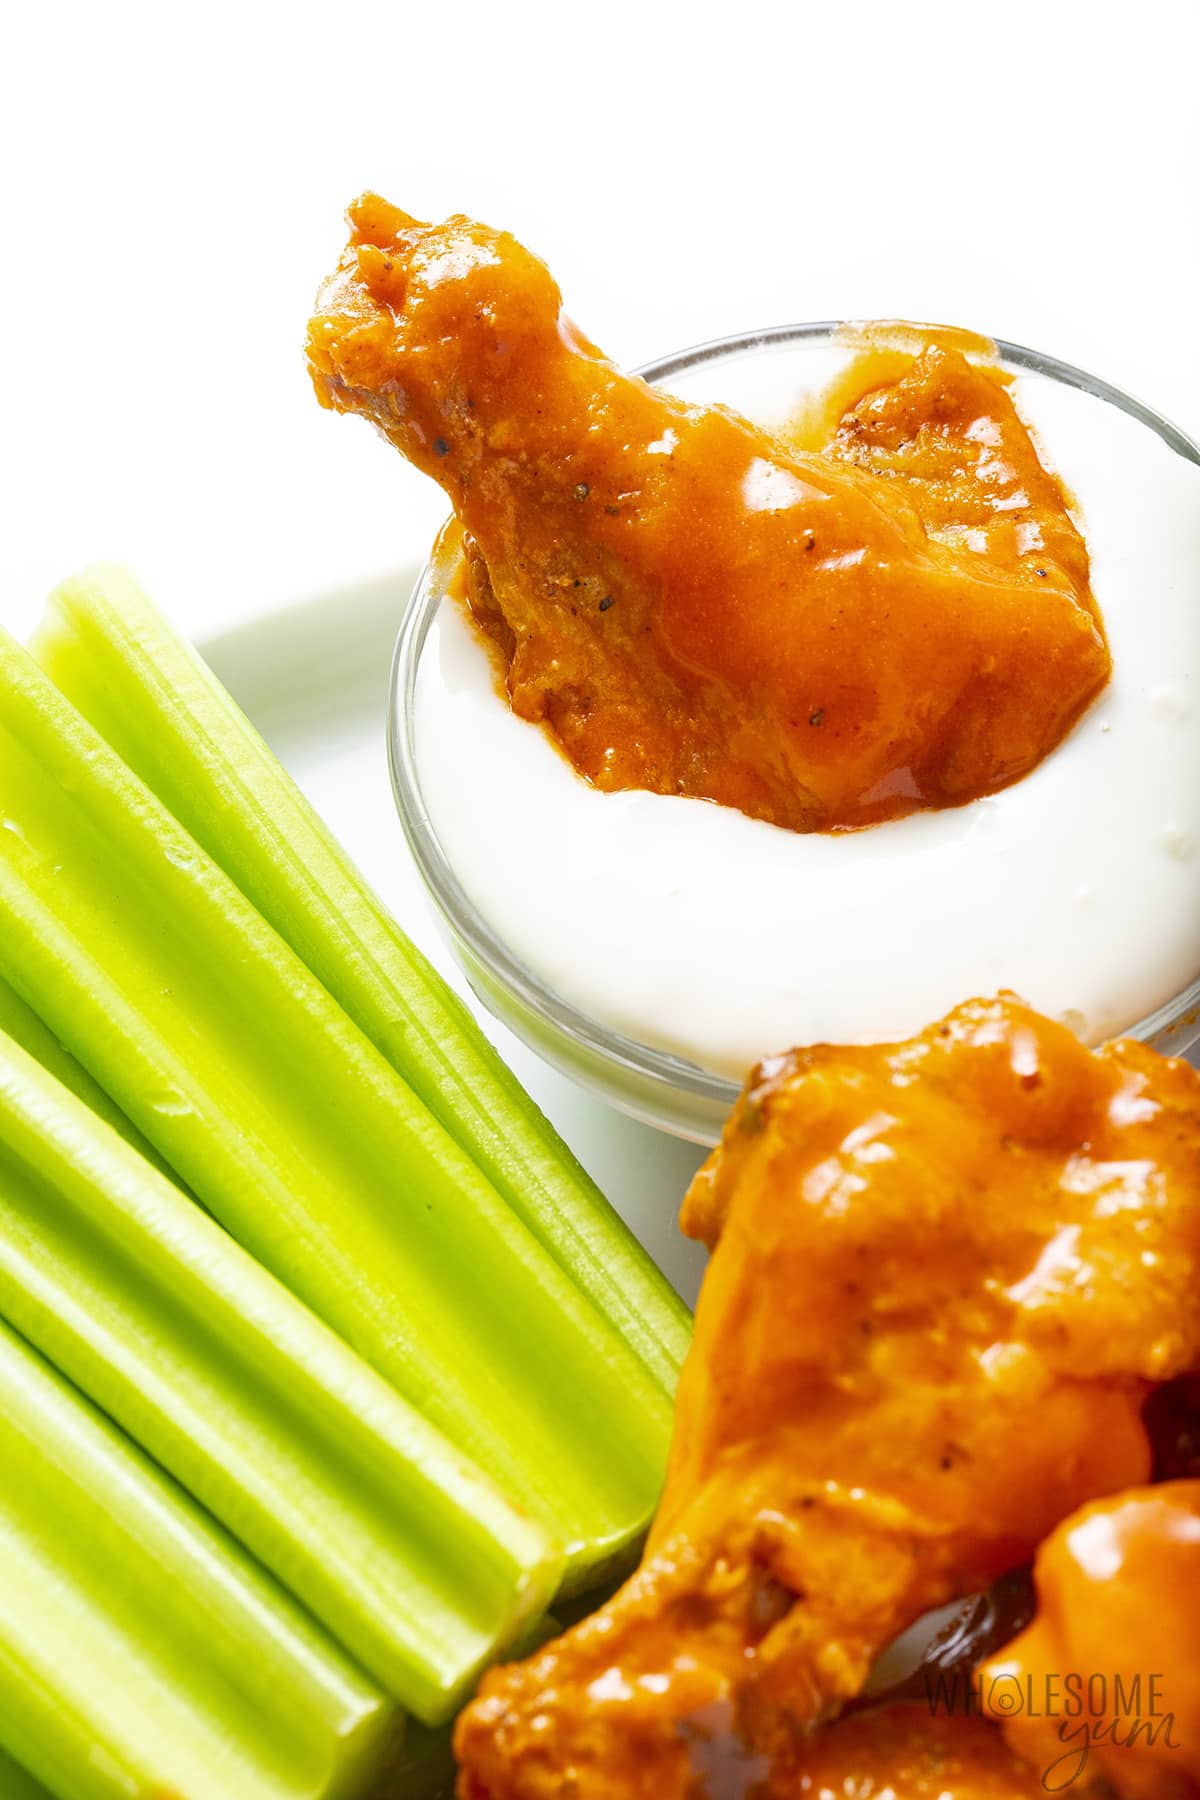 Buffalo wings dipped in blue cheese.